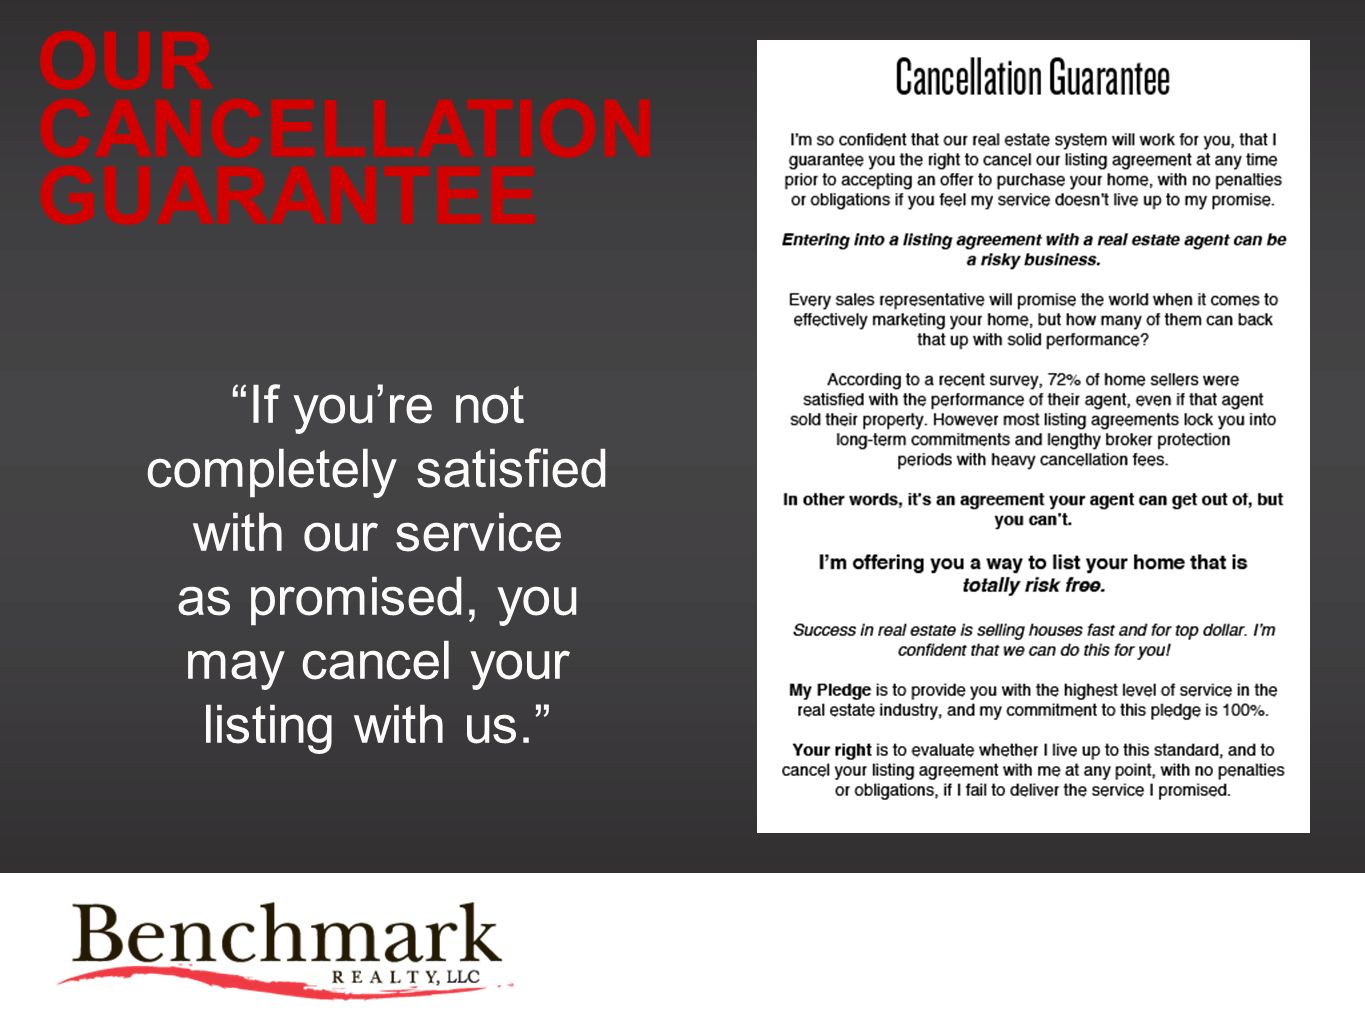 OUR CANCELLATION GUARANTEE If you’re not completely satisfied with our service as promised, you may cancel your listing with us.